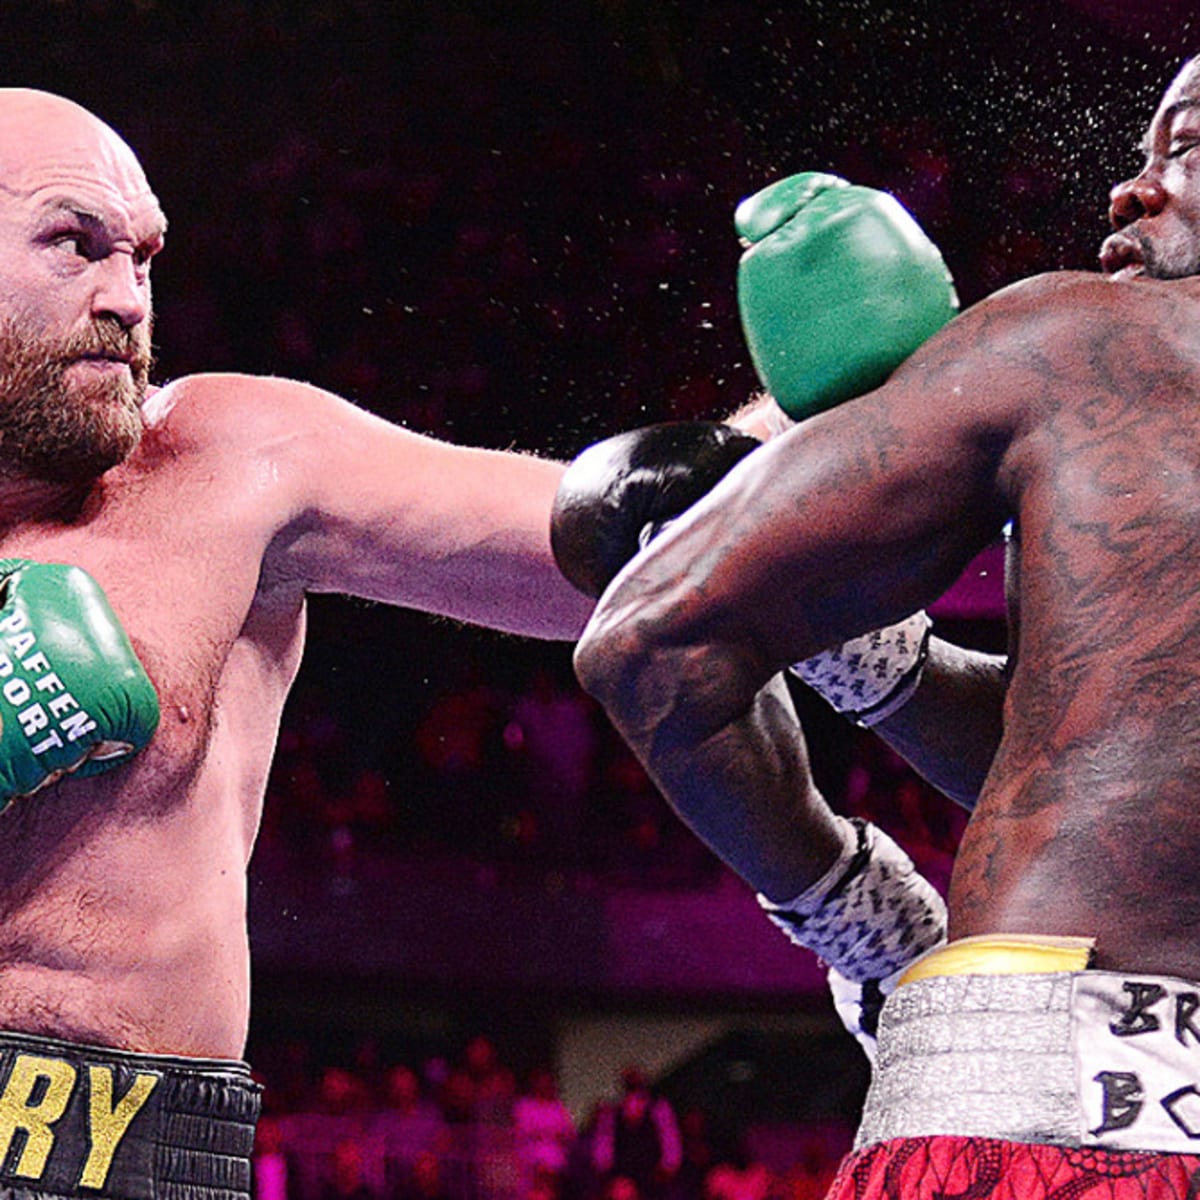 Fury-Wilder 3 Tyson Fury proves hes the best in the world